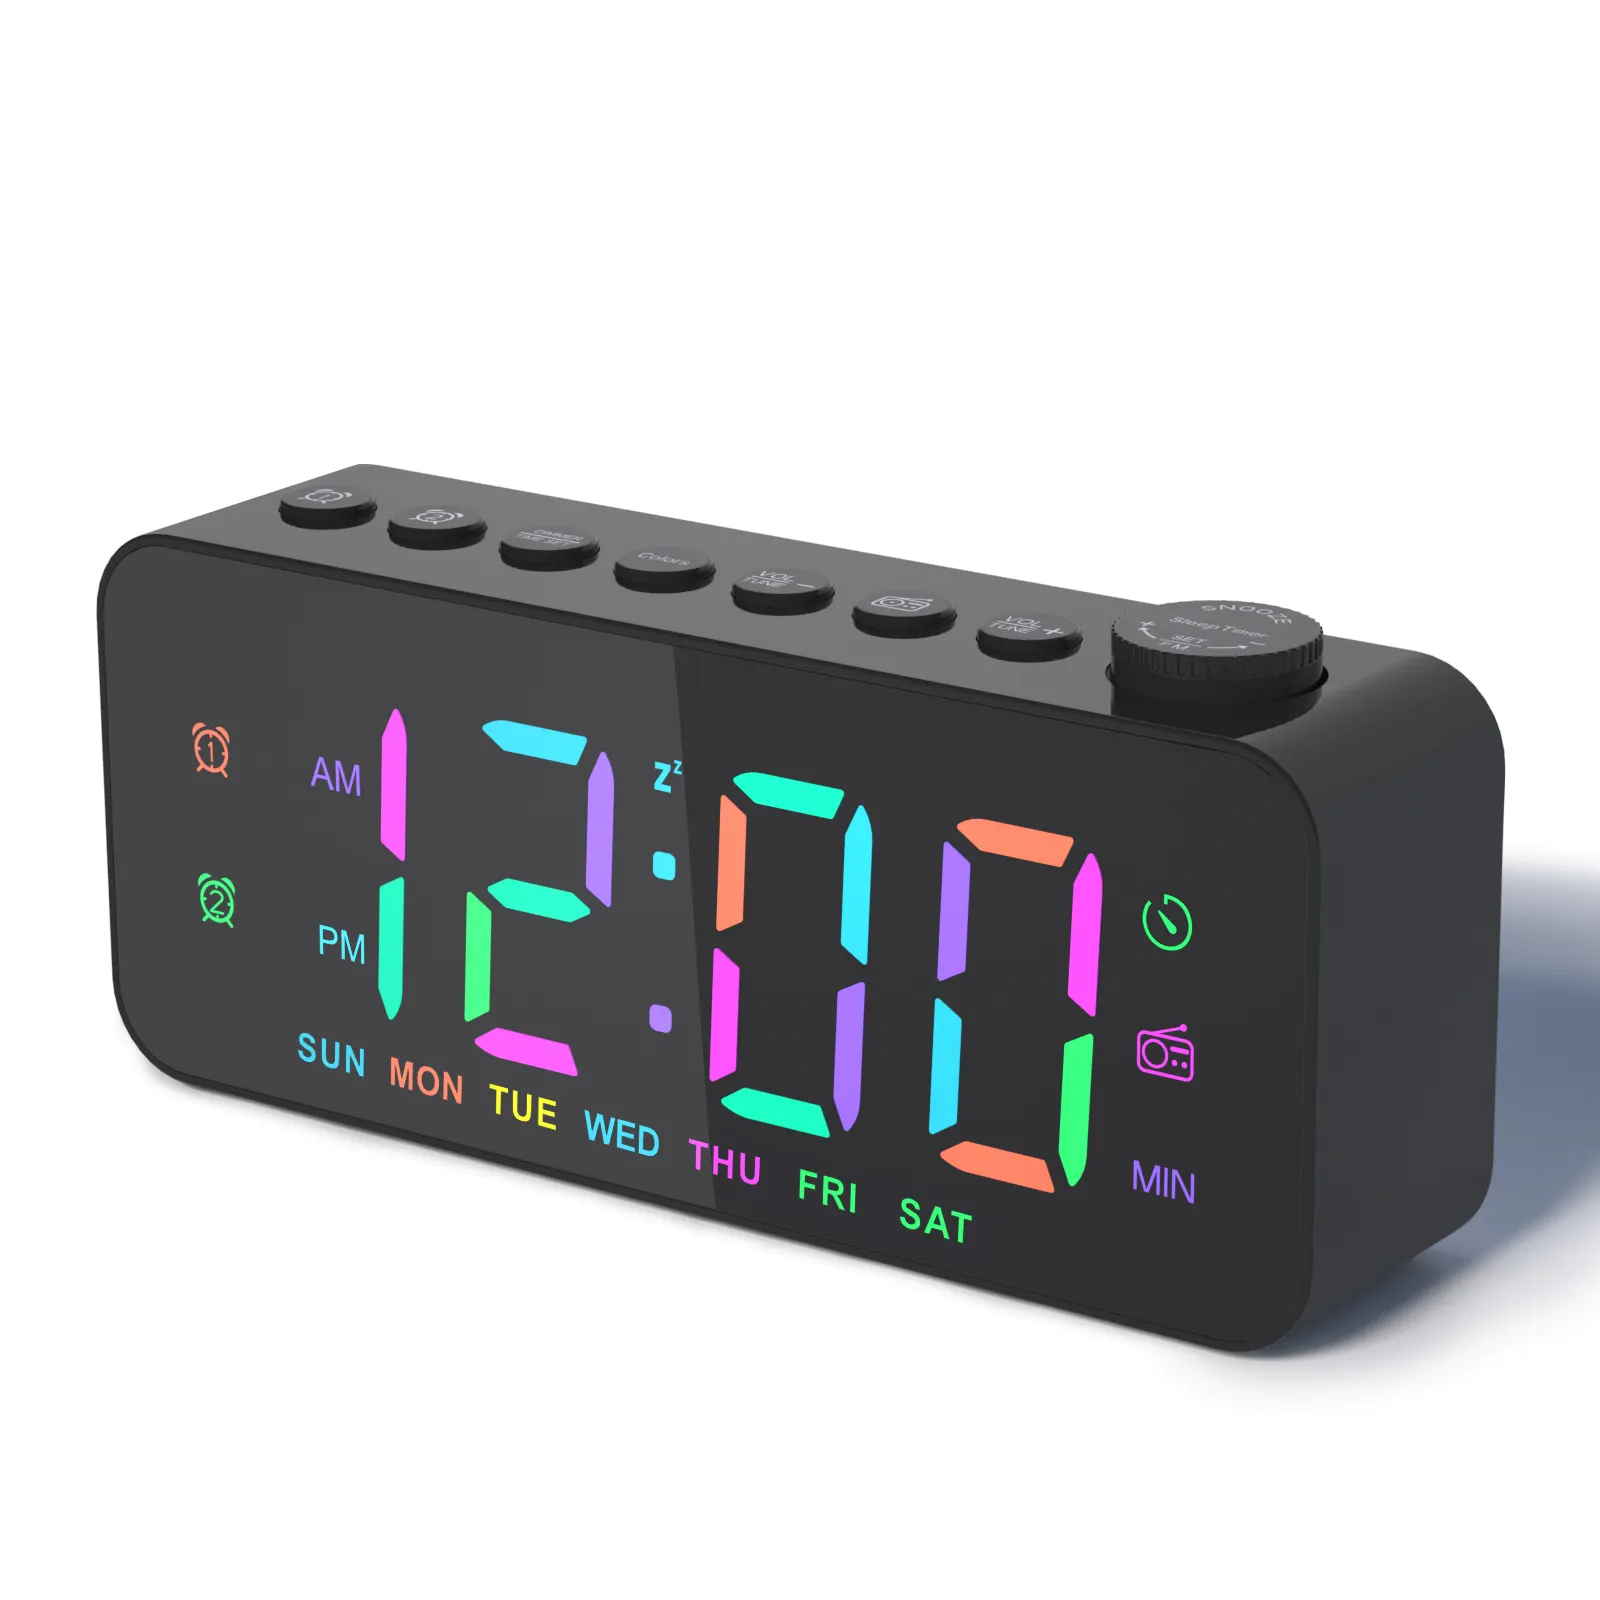 Student Rgb Smart 4 In 1 Wake Up Digital Alarm Clock Speaker With Radio Colorful Double Alarm Clock For Kids